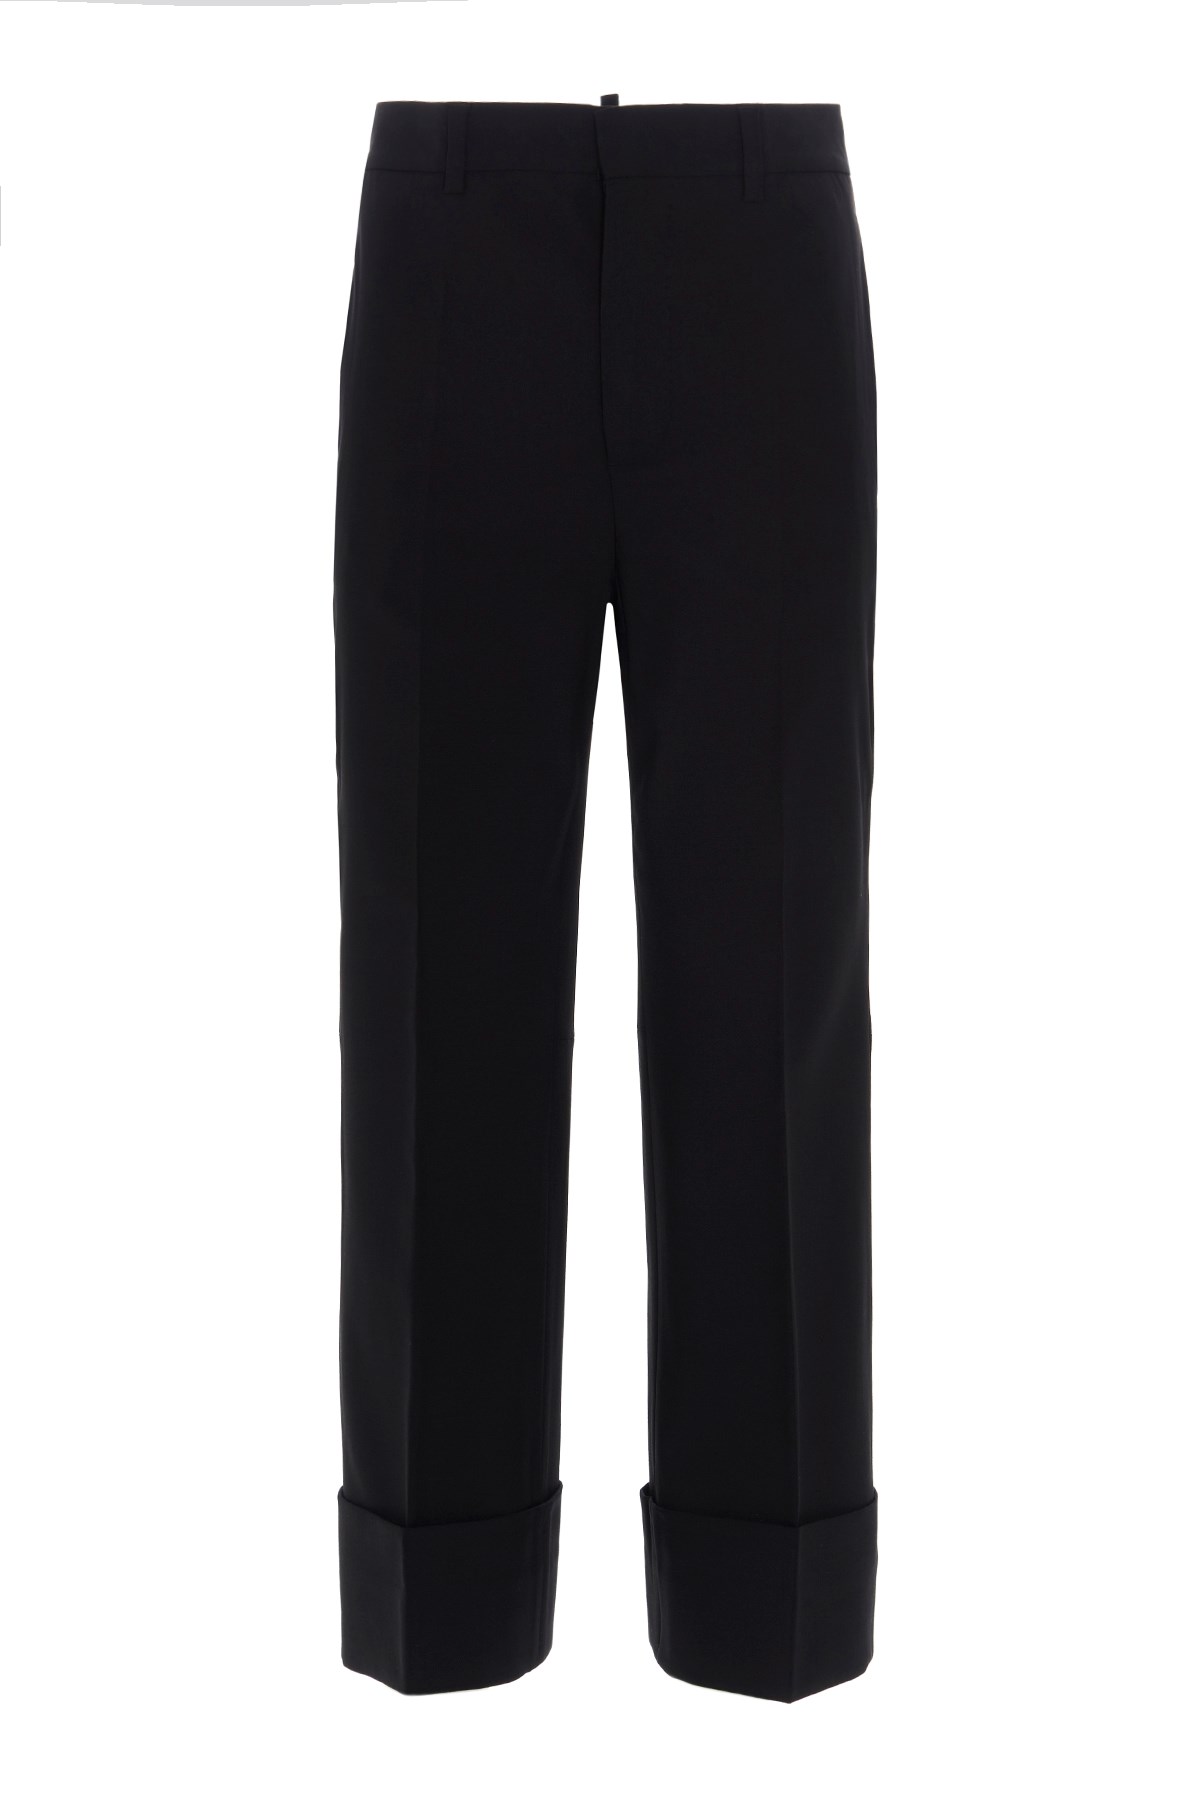 DSQUARED2 'Crop Bell Bottom’ Trousers